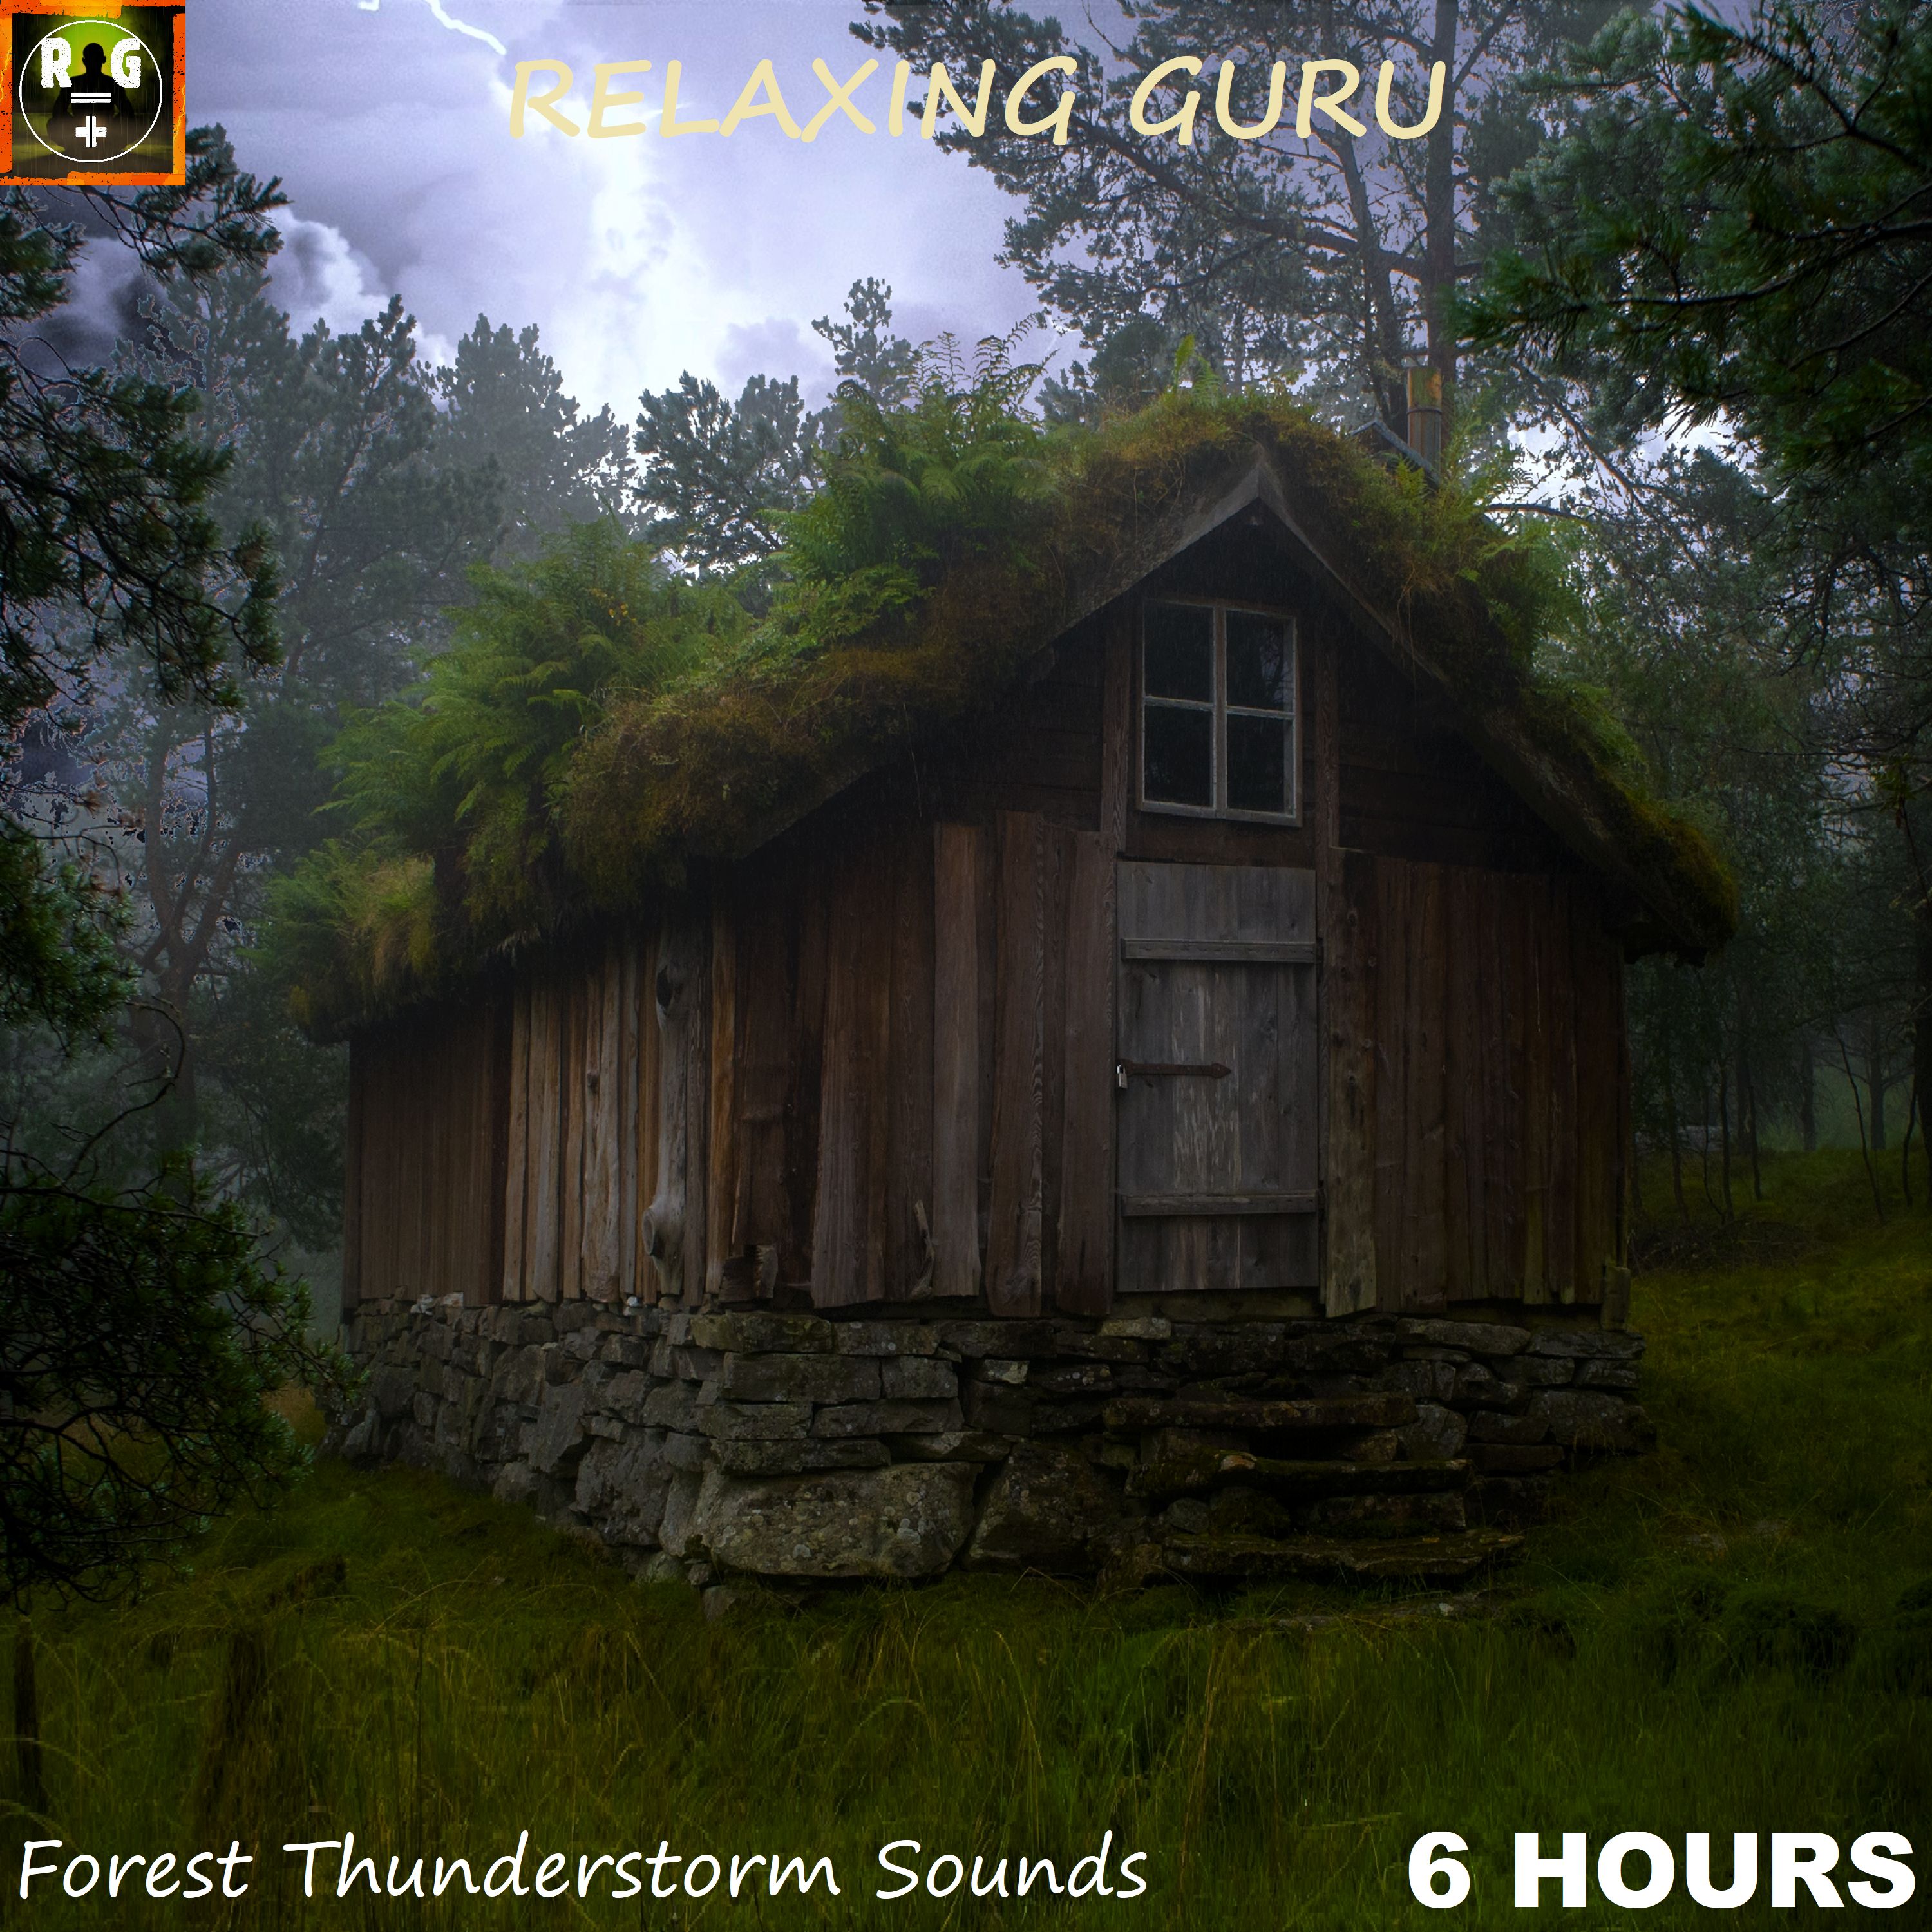 Sækja Relaxing Rain & Thunder on a Wooden Hut deep in the Forest - Thunderstorm Sounds for Sleep (6 HOURS)